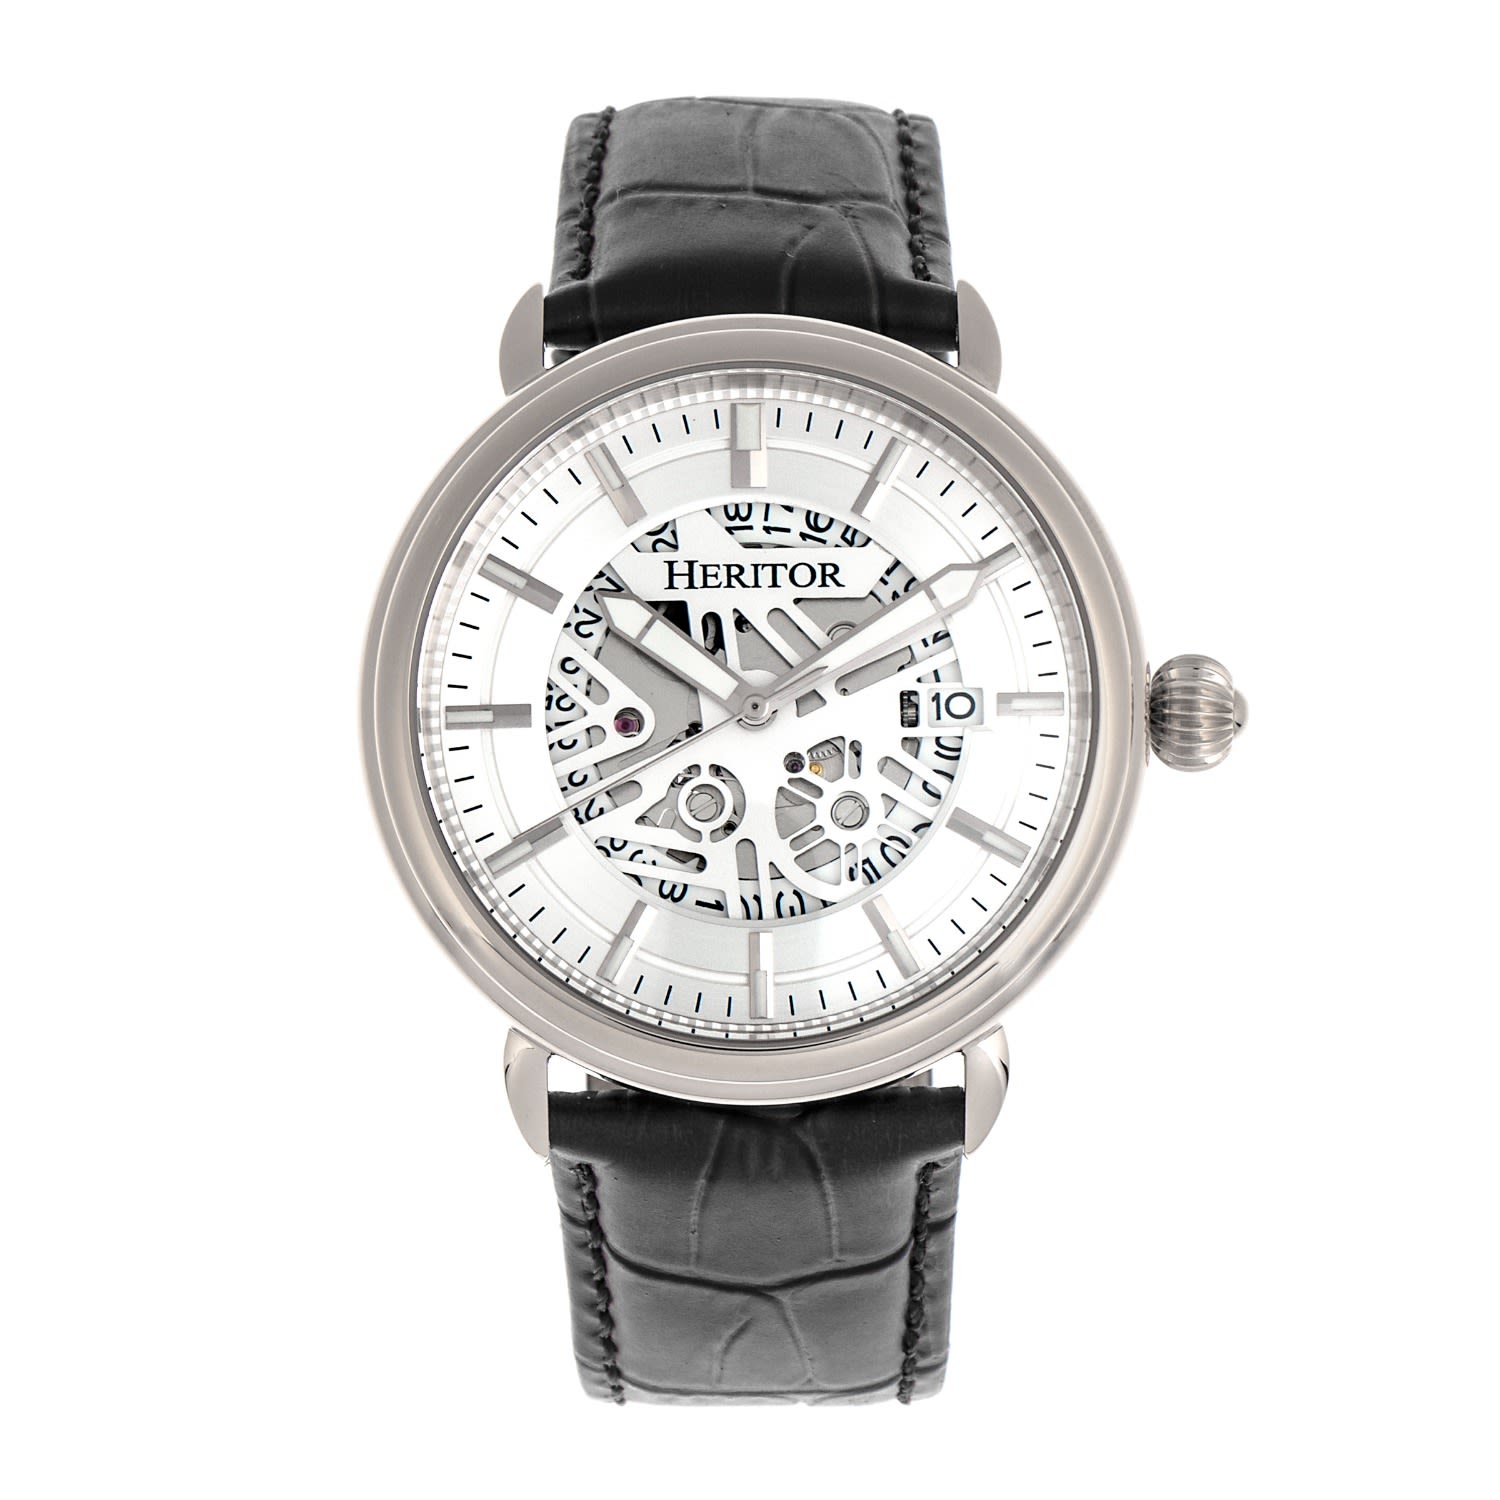 Men’s Mattias Semi-Skeleton Leather-Band Watch With Date - Silver One Size Heritor Automatic